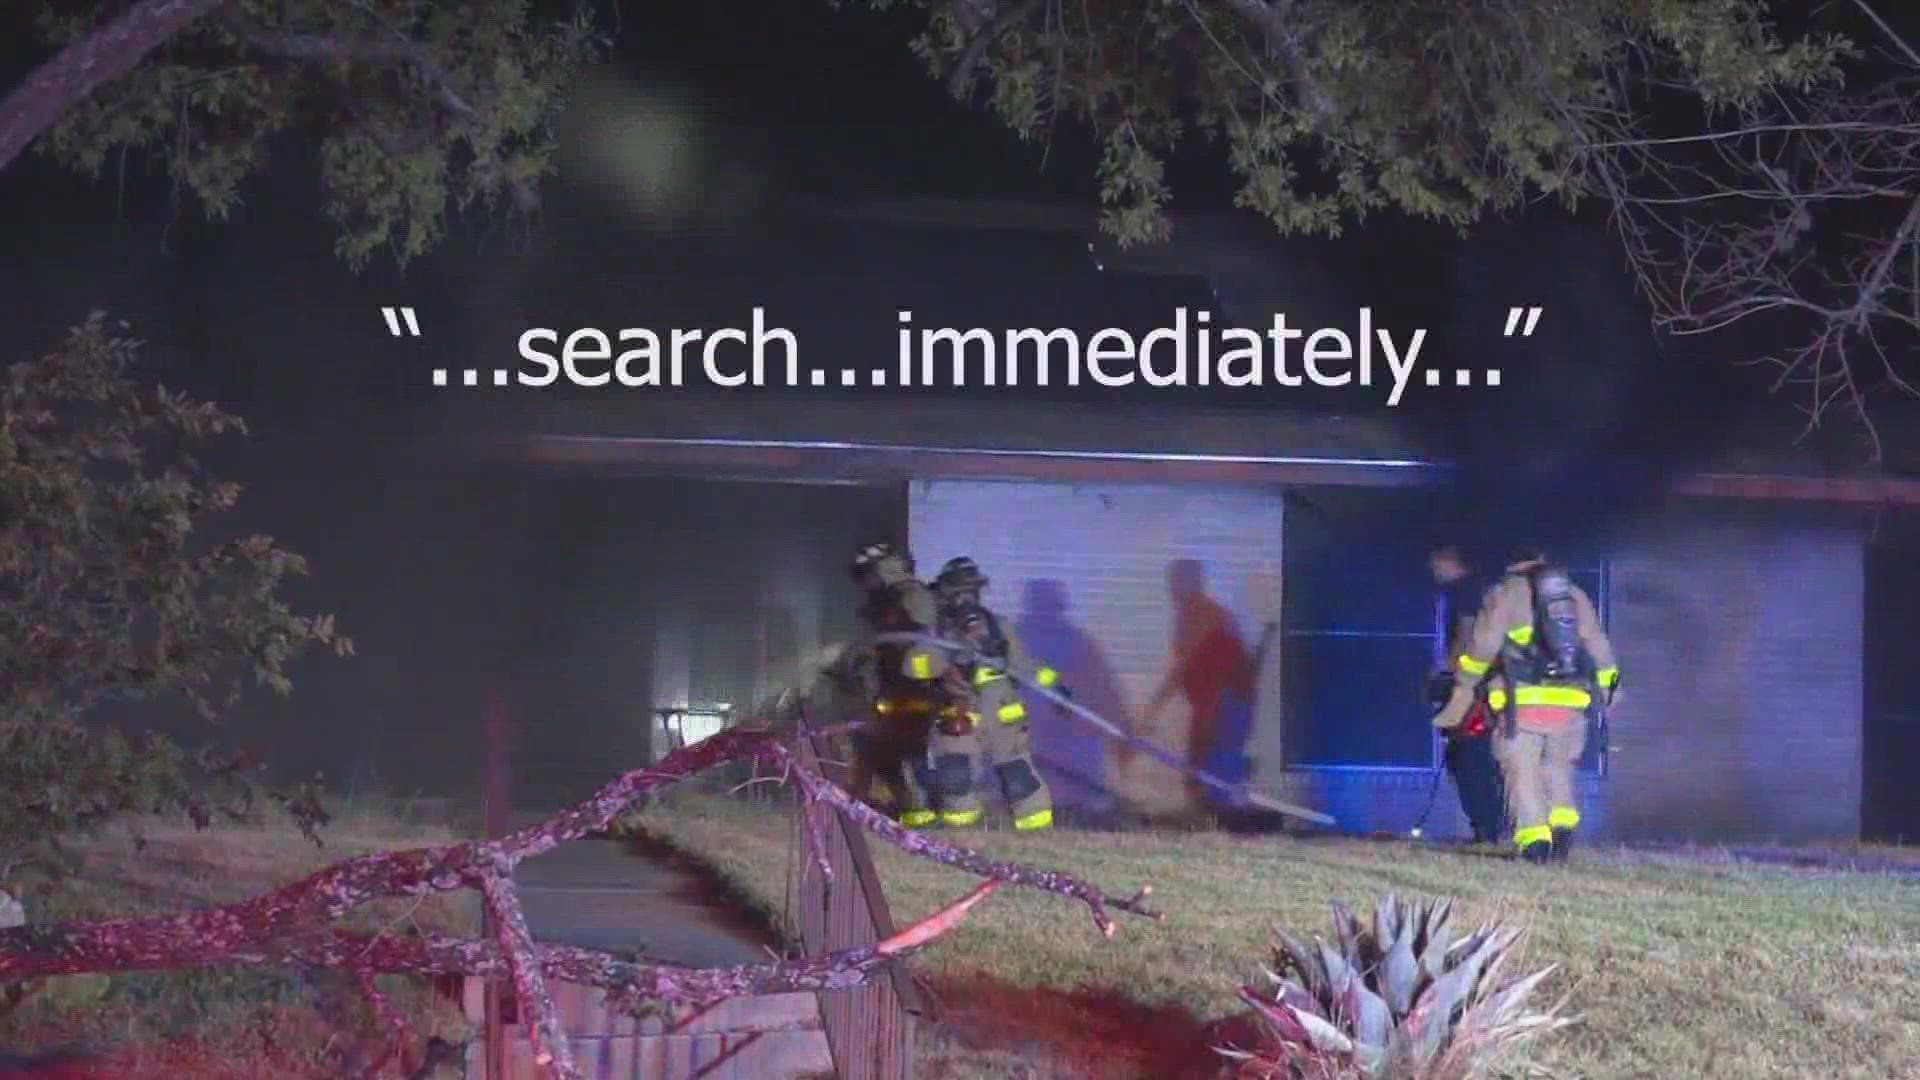 12 people have died in San Antonio house fires so far this year, and officials say planning is essential.